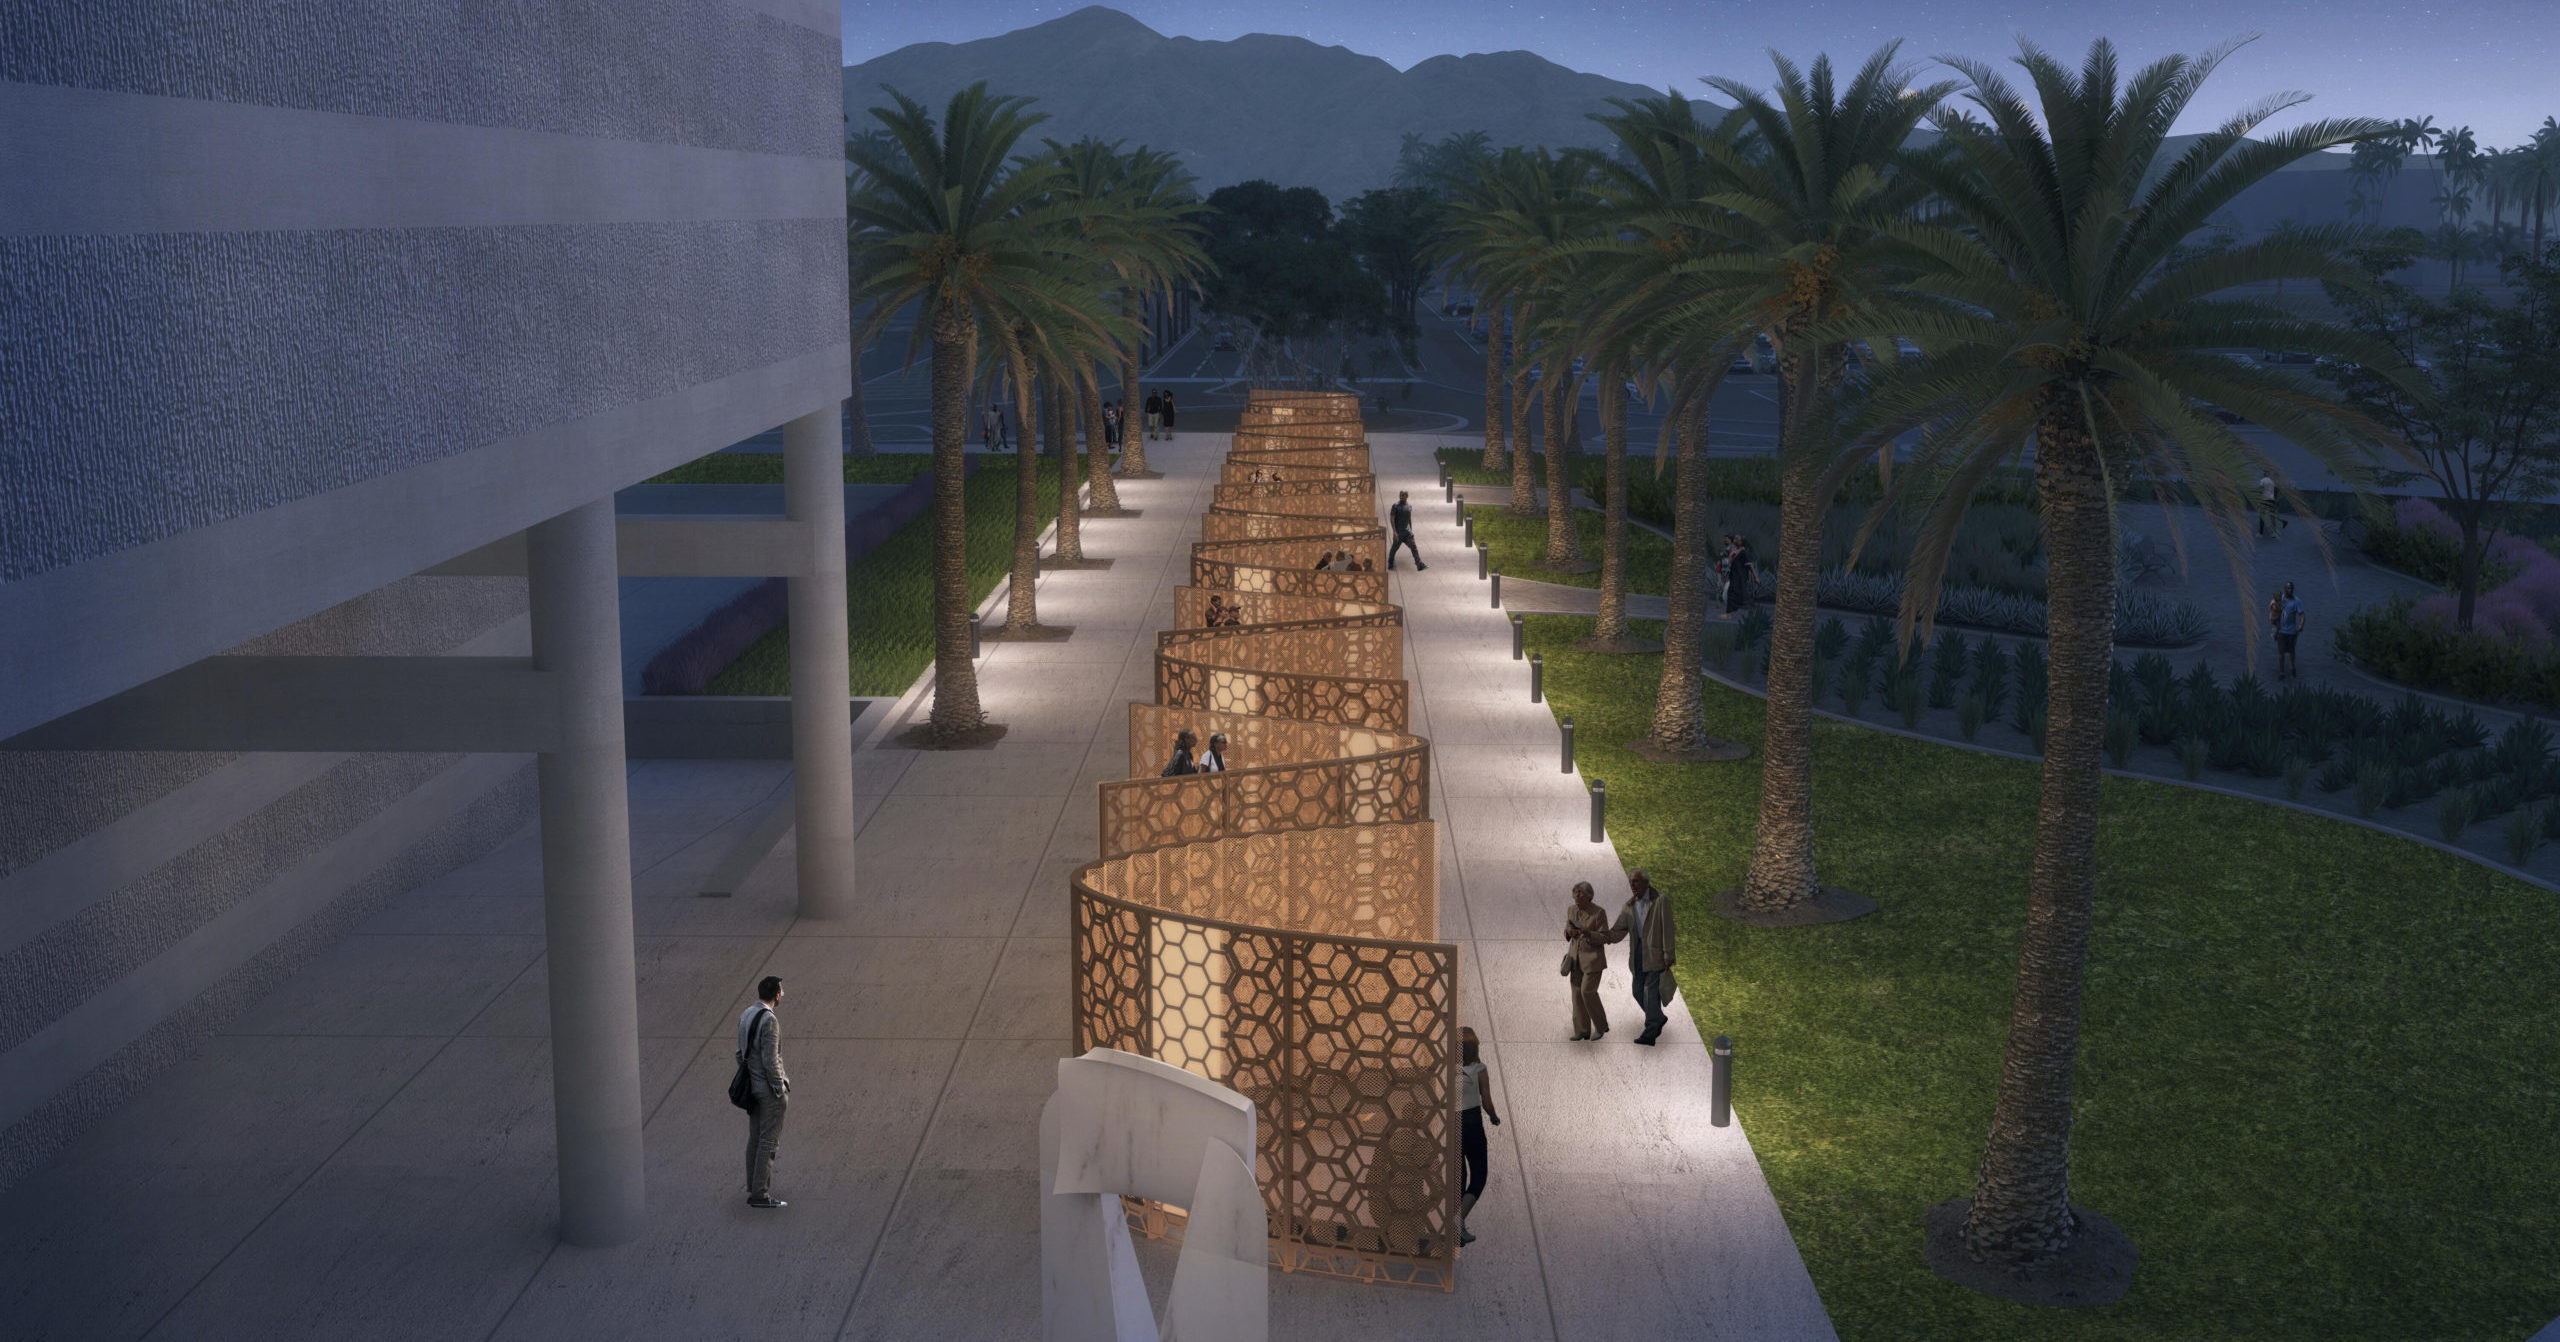 A concept rendering shows a future memorial in honor of the victims of a terrorist attack that killed 14 people at a holiday party in San Bernardino, California. Plans were formally announced on Dec. 2, 2020, to build a "Curtain of Courage" at the site of the shooting.